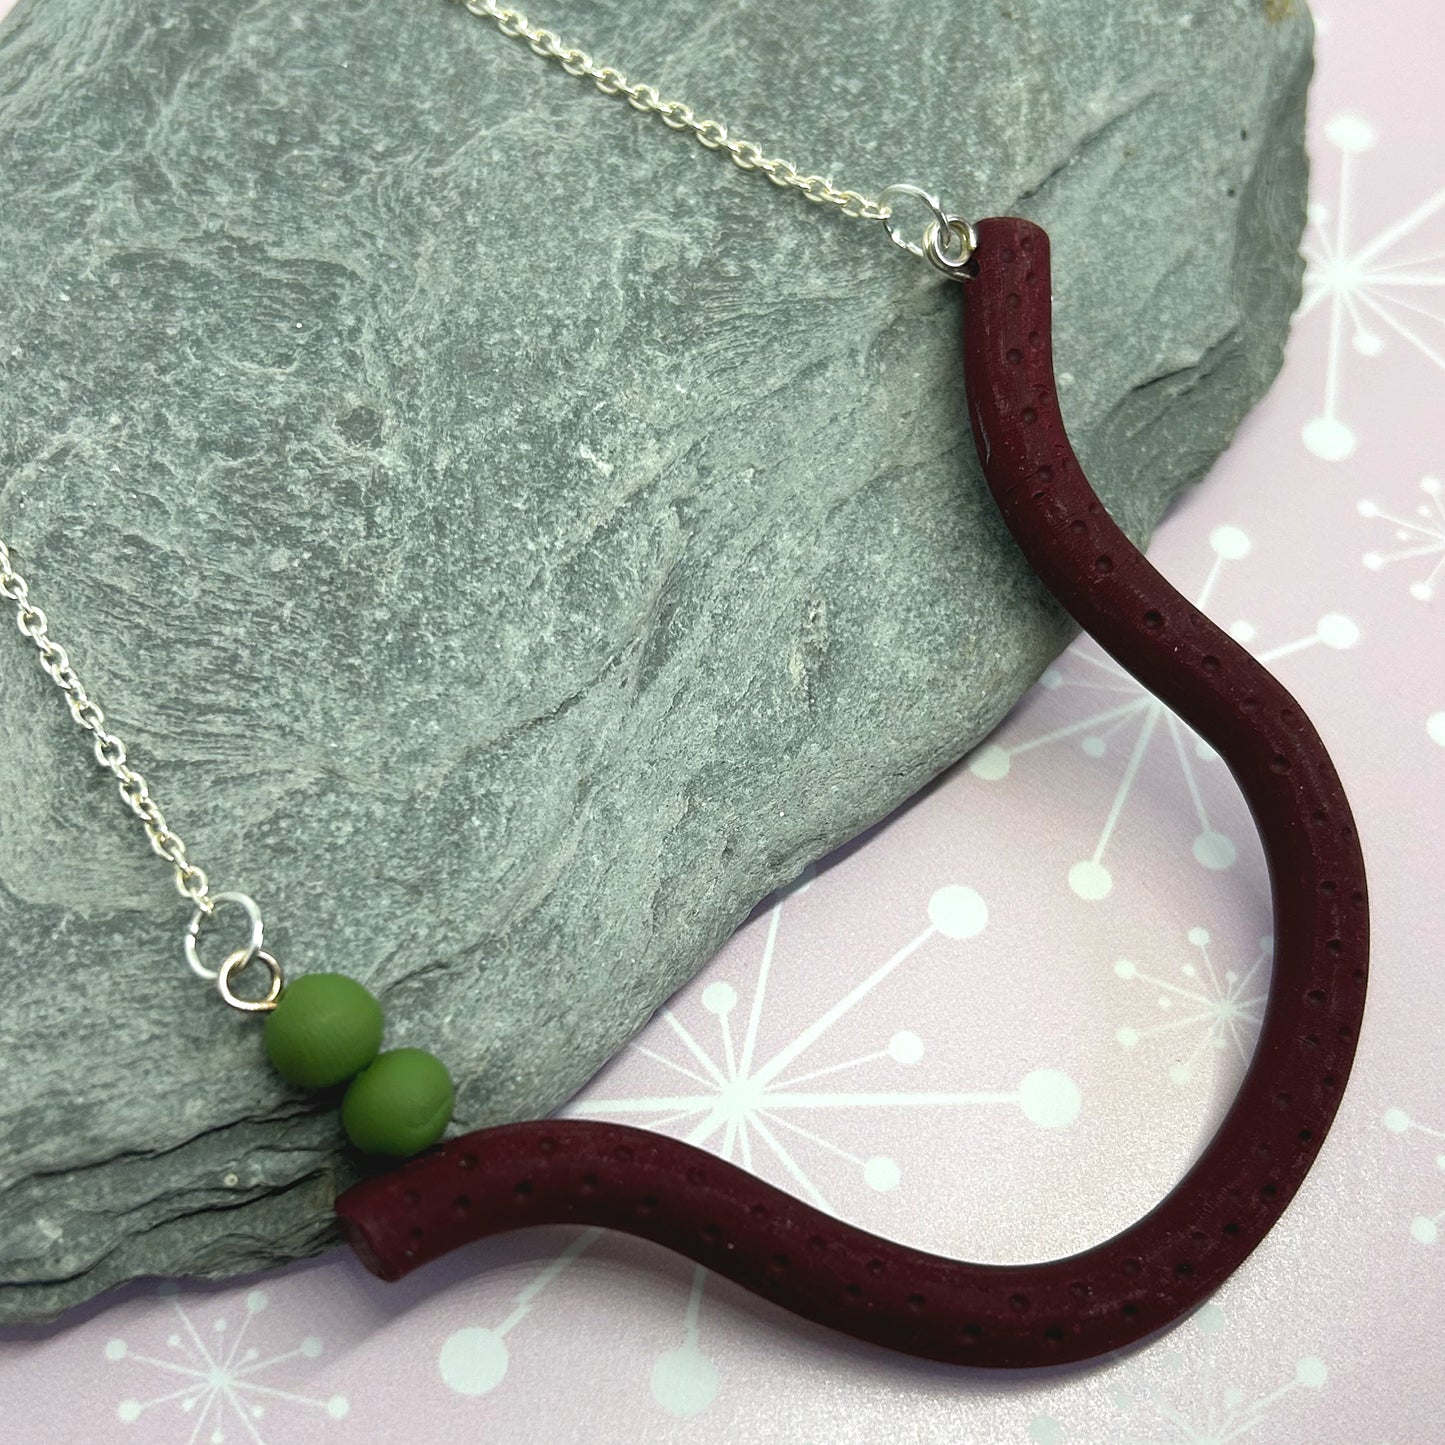 Dotty wiggle Necklace - The Argentum Design Co